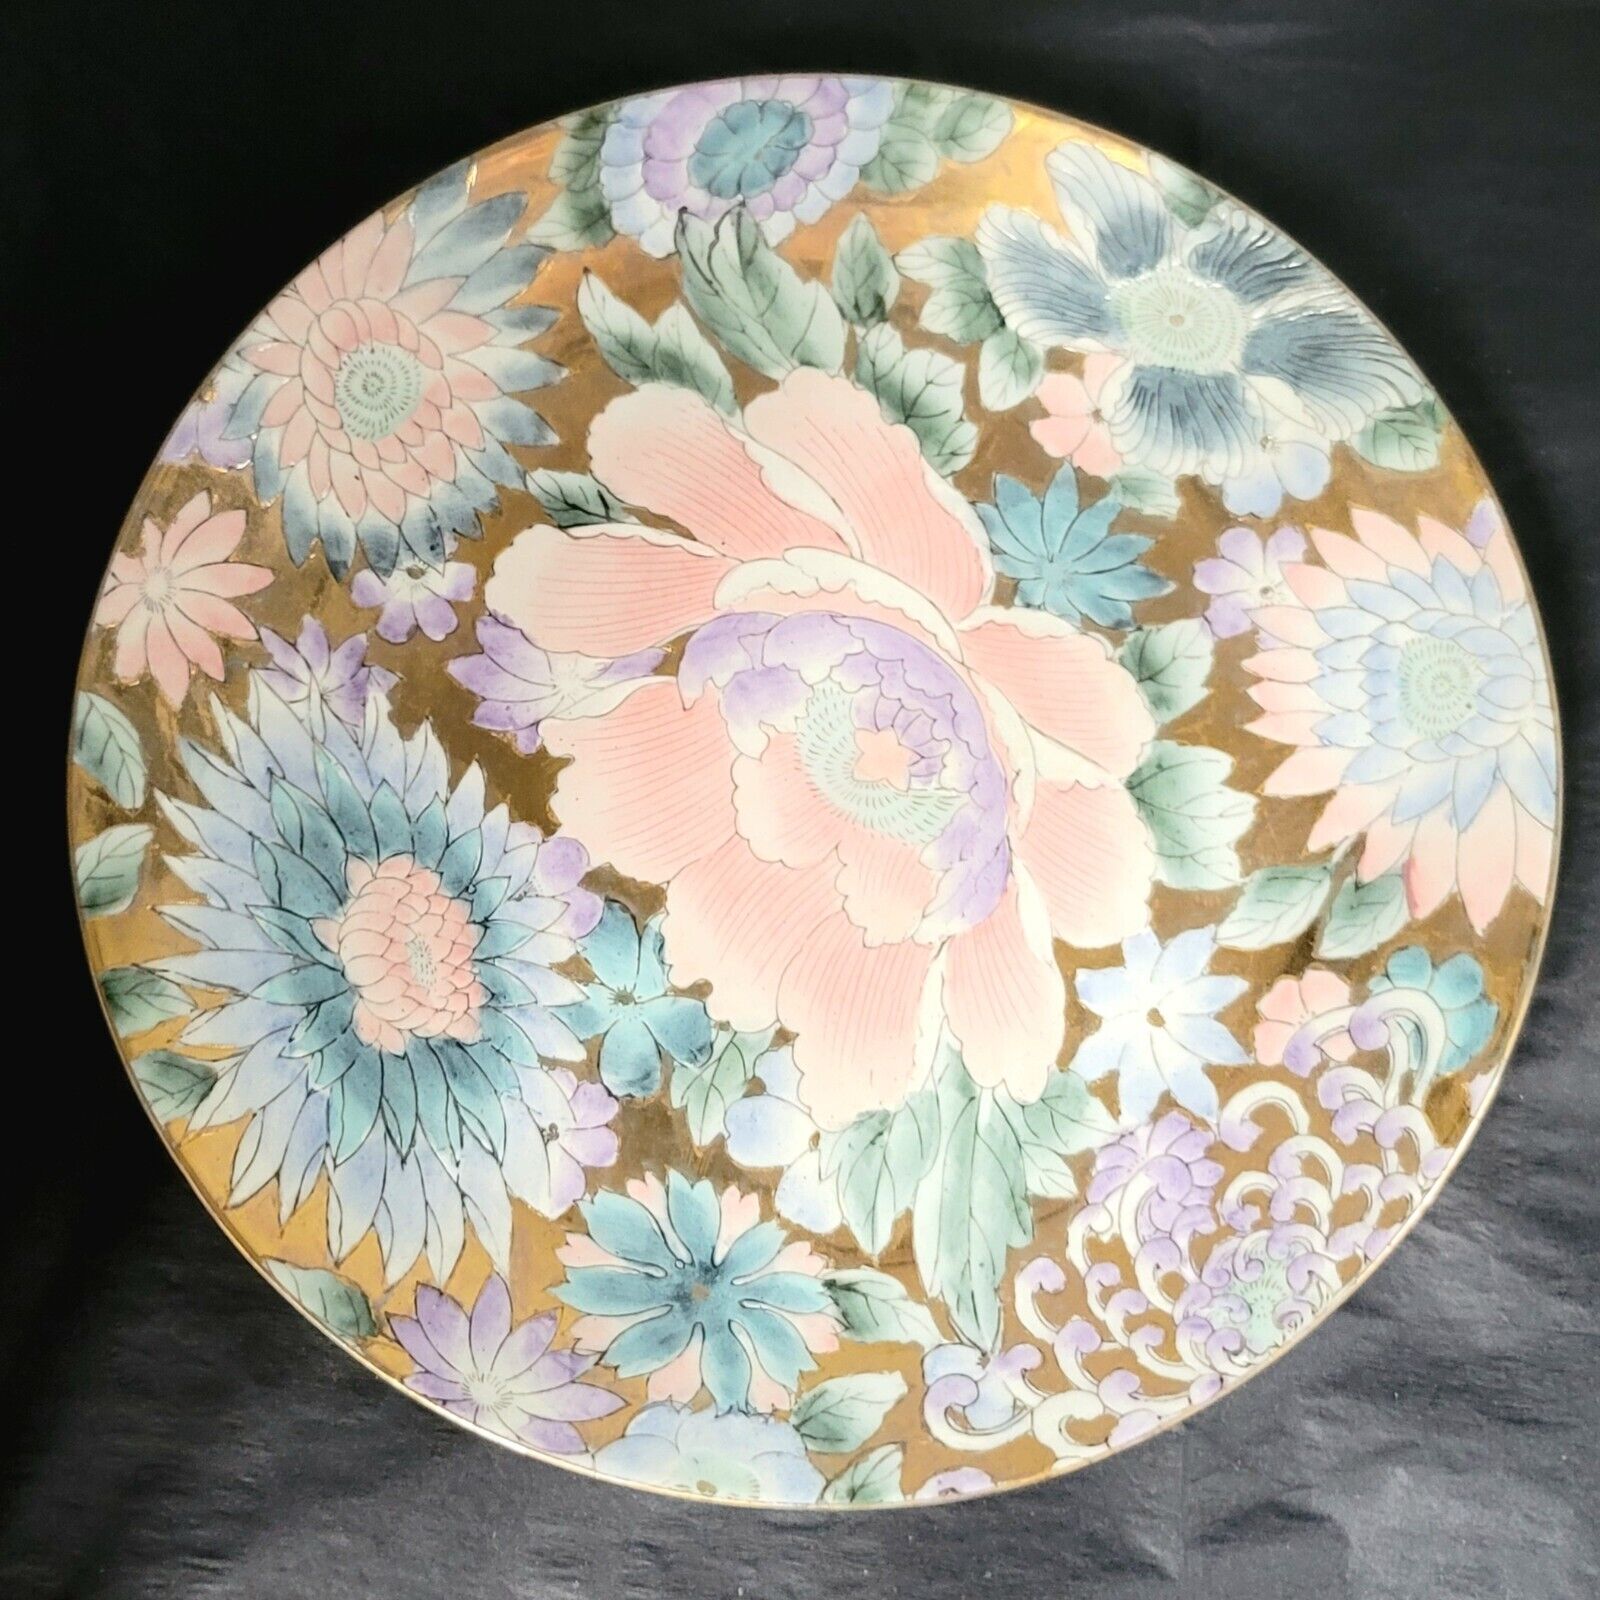 TOYO Macau Pink Peony Golden Blossom Hand Painted Plate. 10 inch